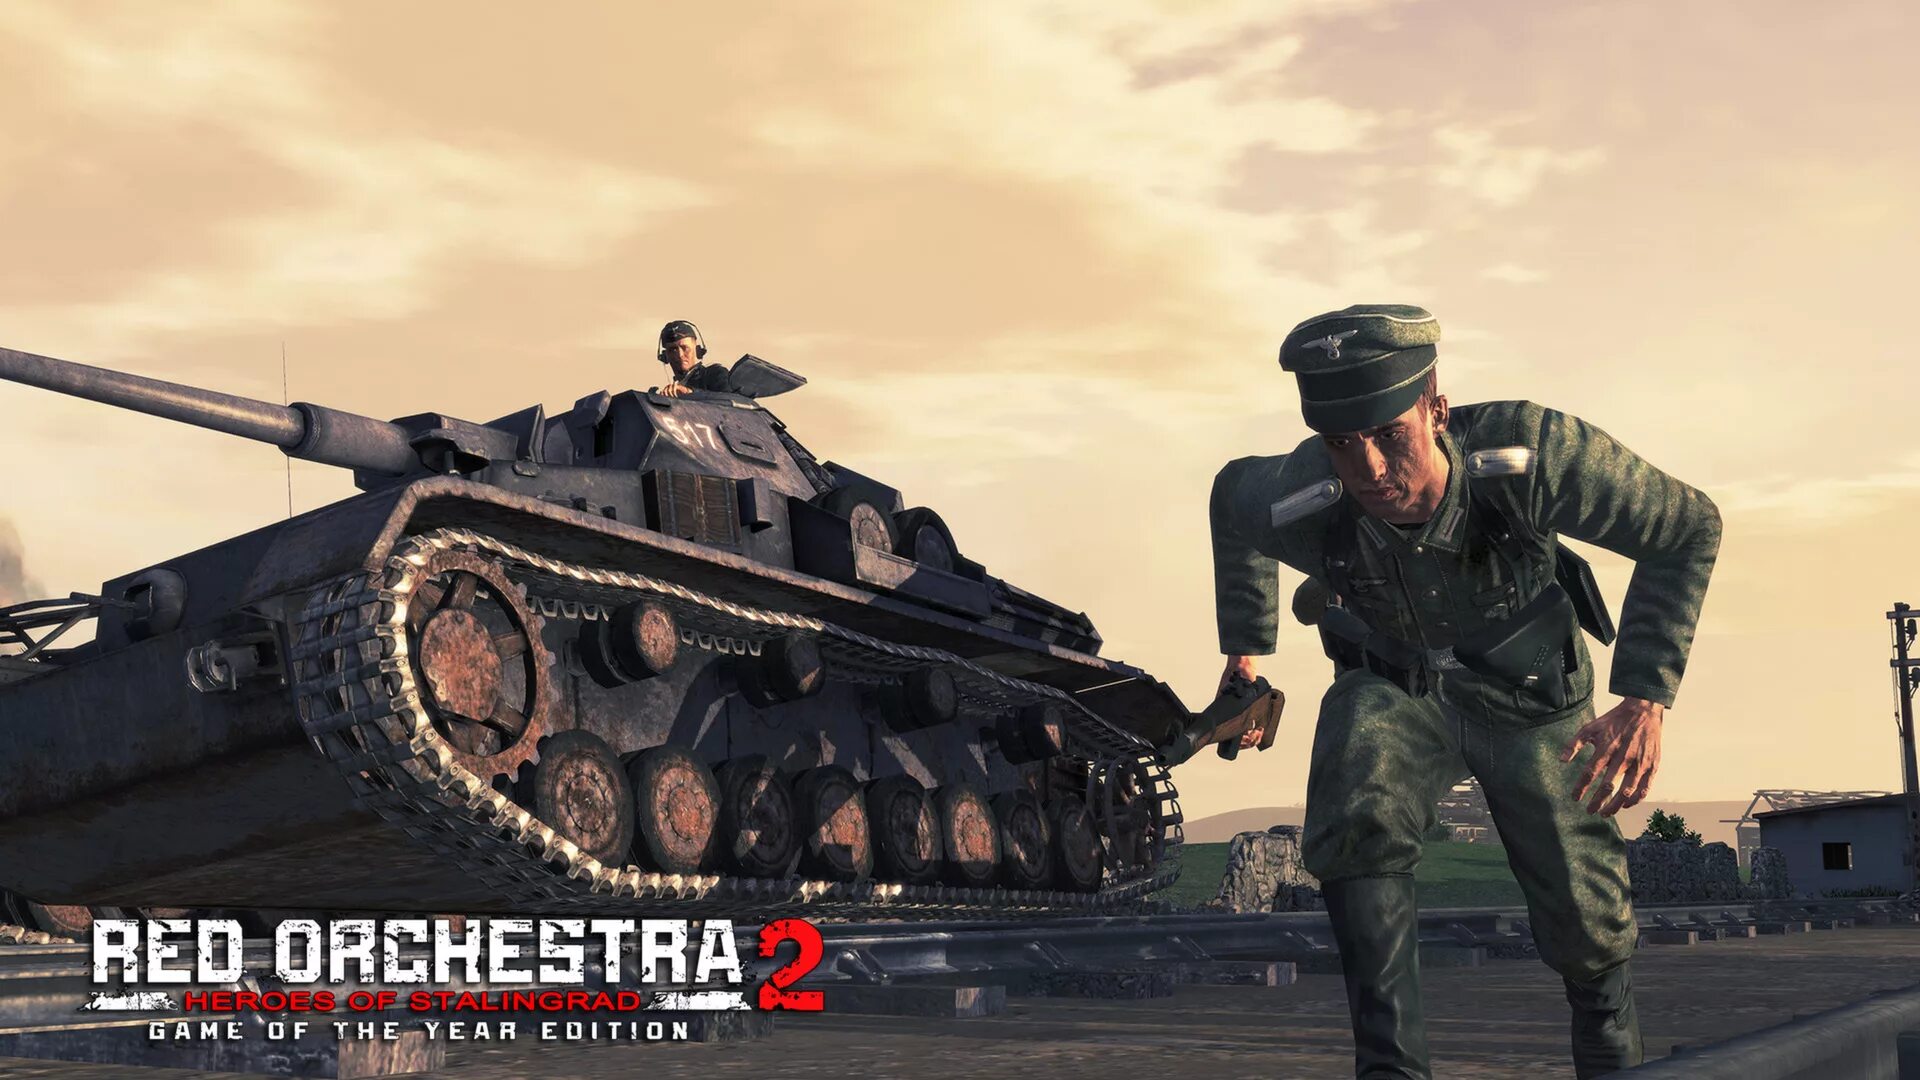 Red Orchestra 2: Heroes of Stalingrad. Red Orchestra: Heroes of Stalingrad. Rising Storm Red Orchestra 2 Heroes of Stalingrad. Rising Storm Stalingrad Red Orchestra.